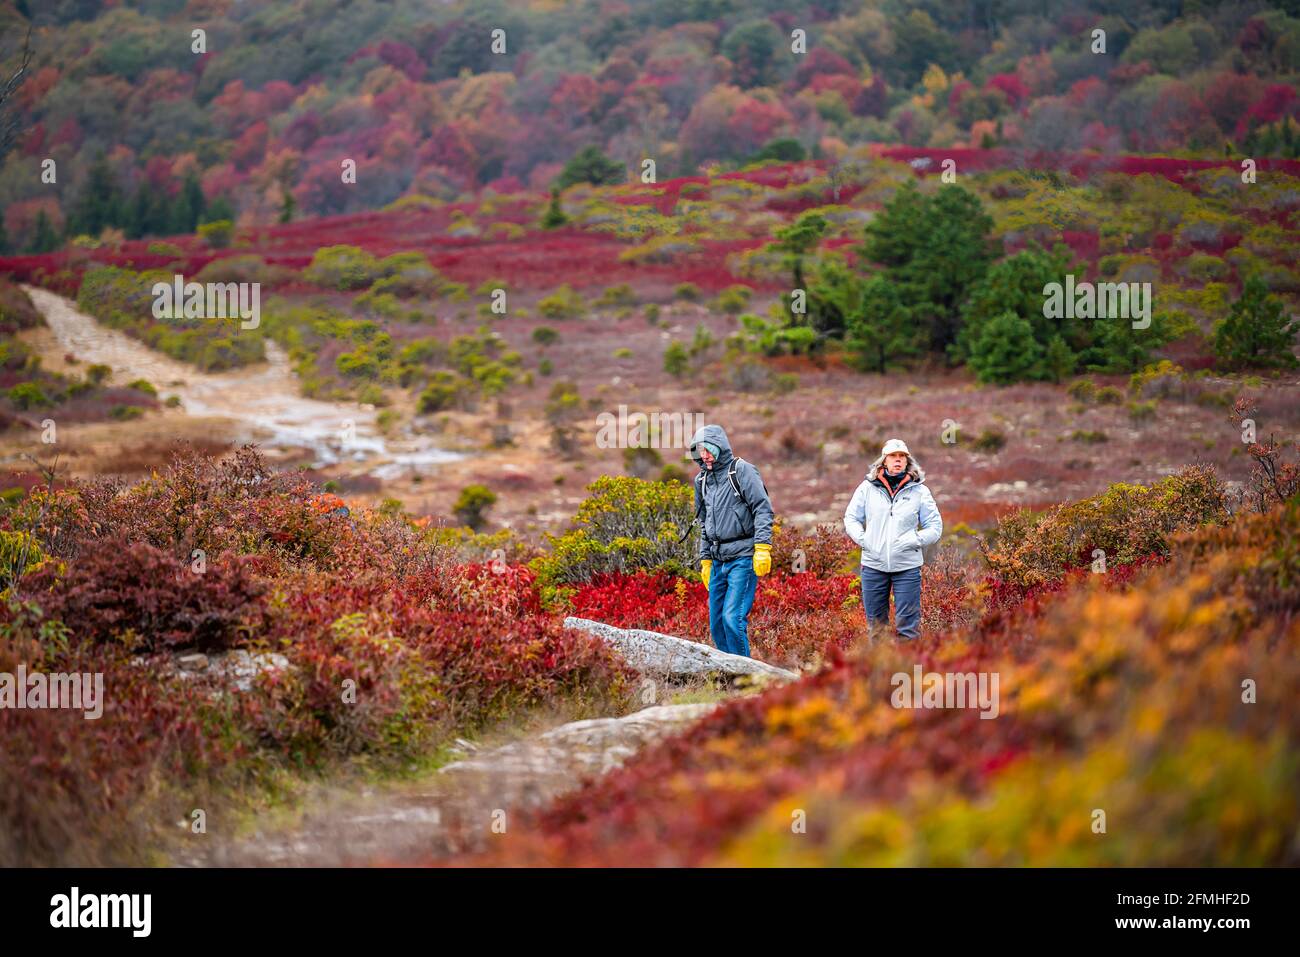 Davis, USA - October 5, 2020: Autumn fall season at Bear Rocks trail trailhead and candid people hiking in Dolly Sods Wilderness in West Virginia Mono Stock Photo